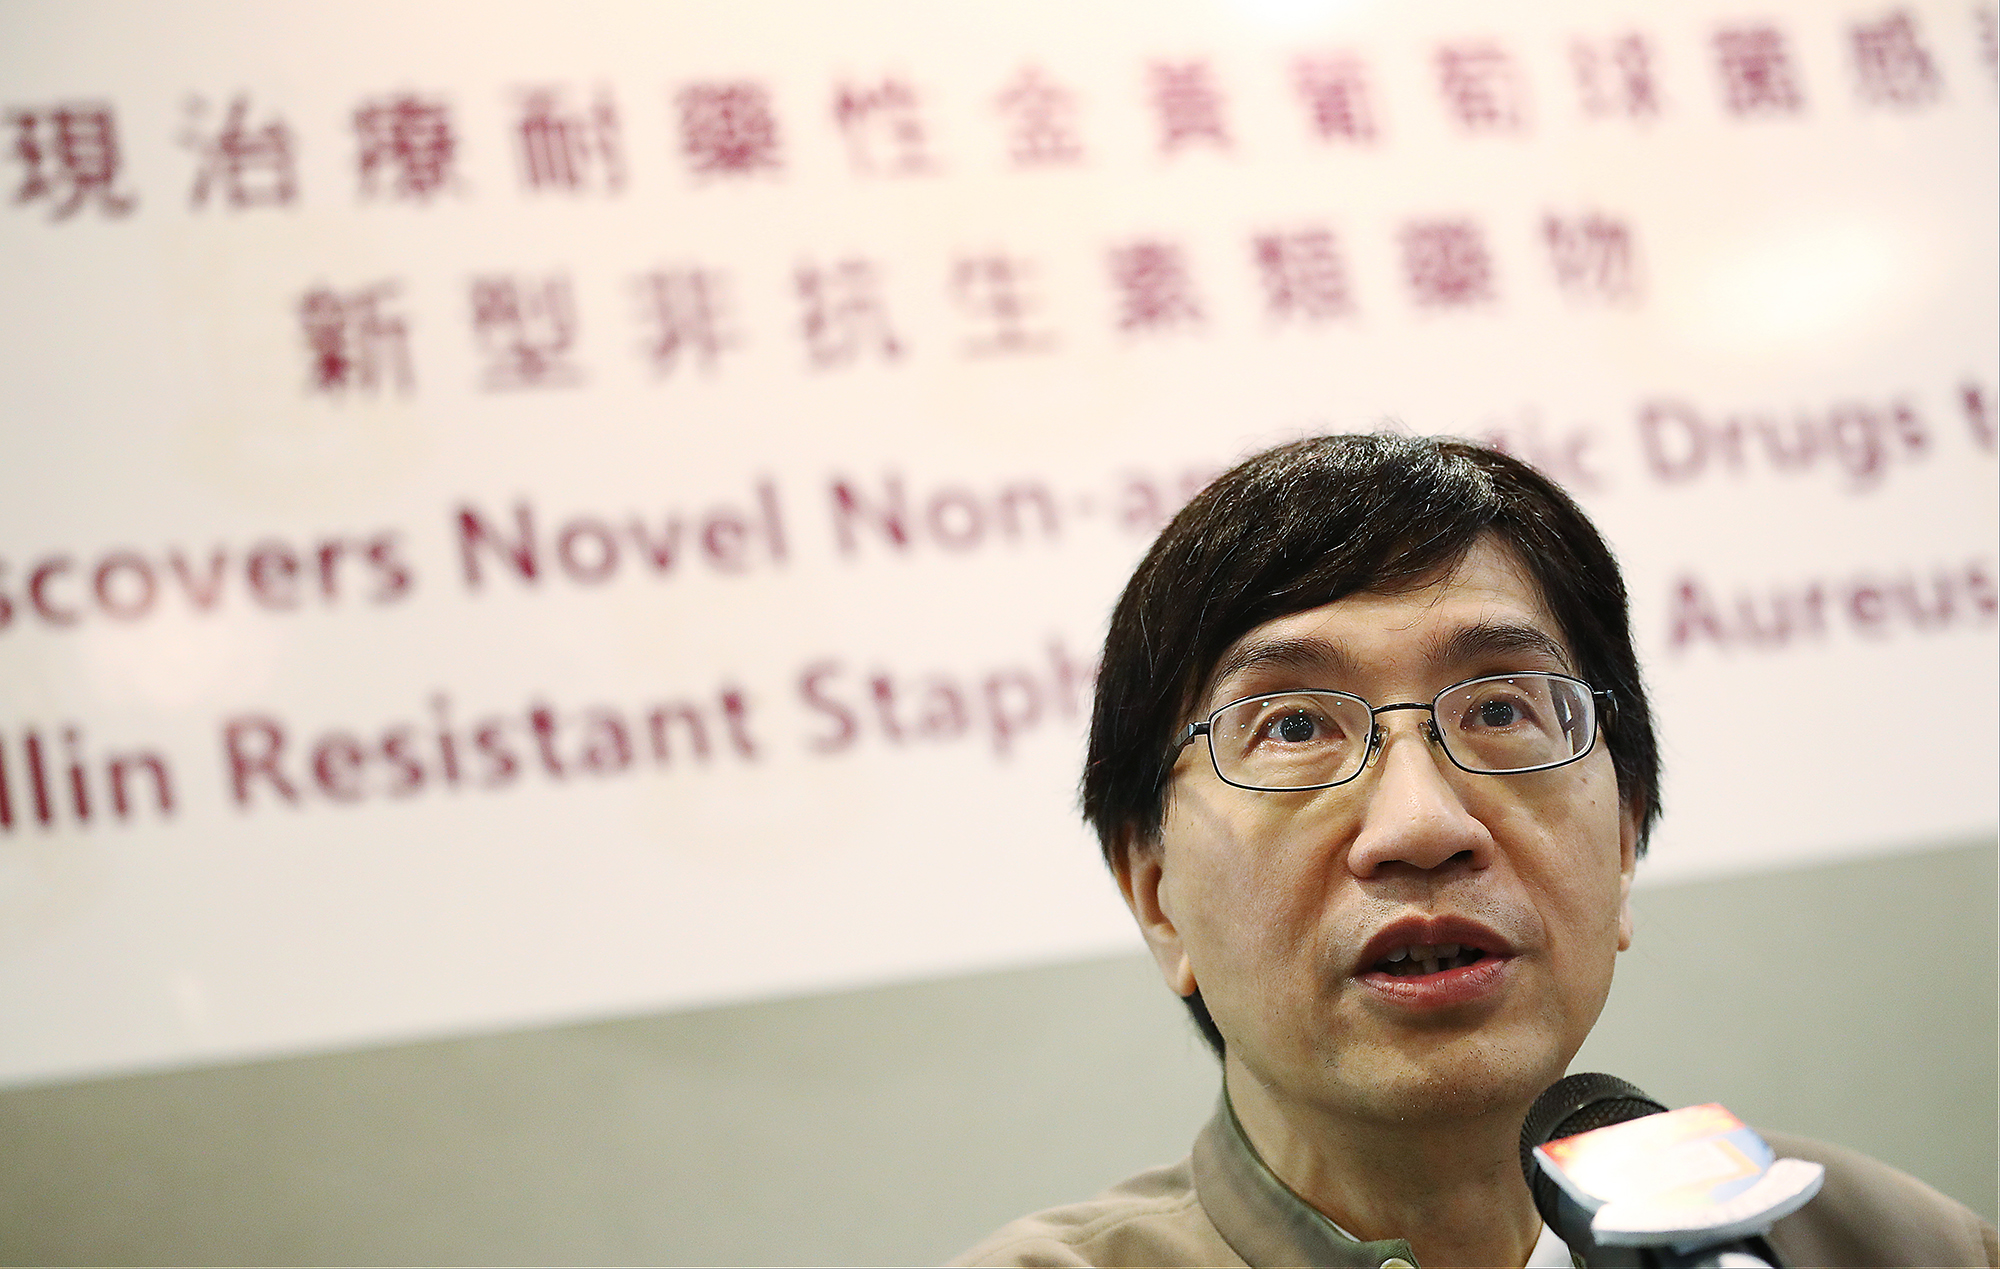 Professor Yuen Kwok-yung attends a press conference in Hong Kong on September 7, 2017.